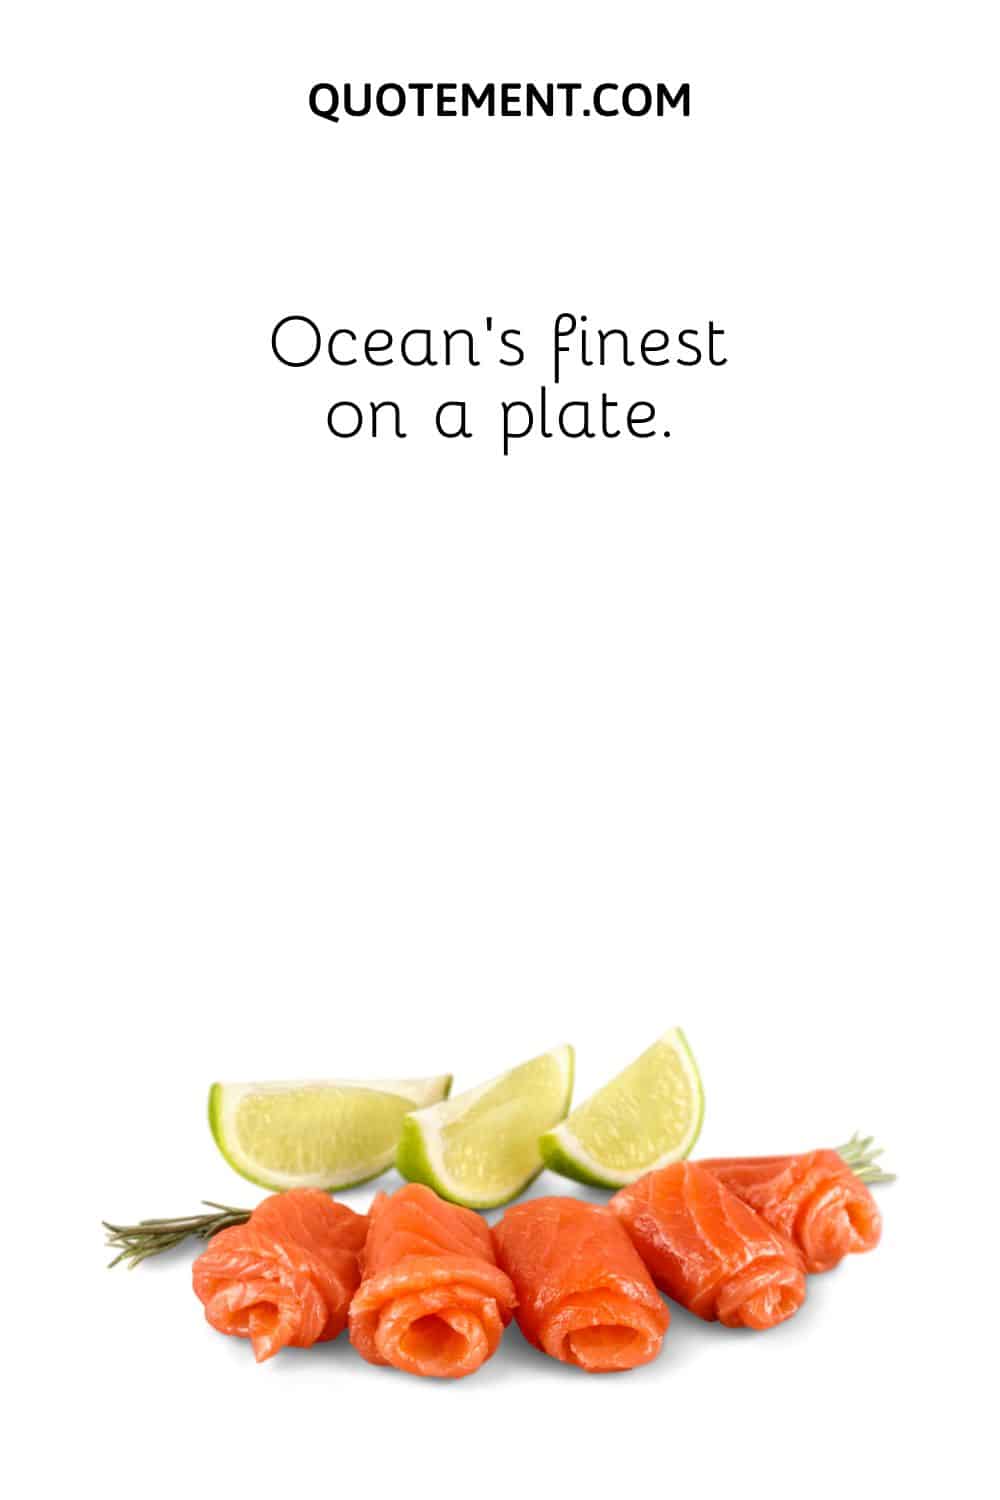 Ocean’s finest on a plate.